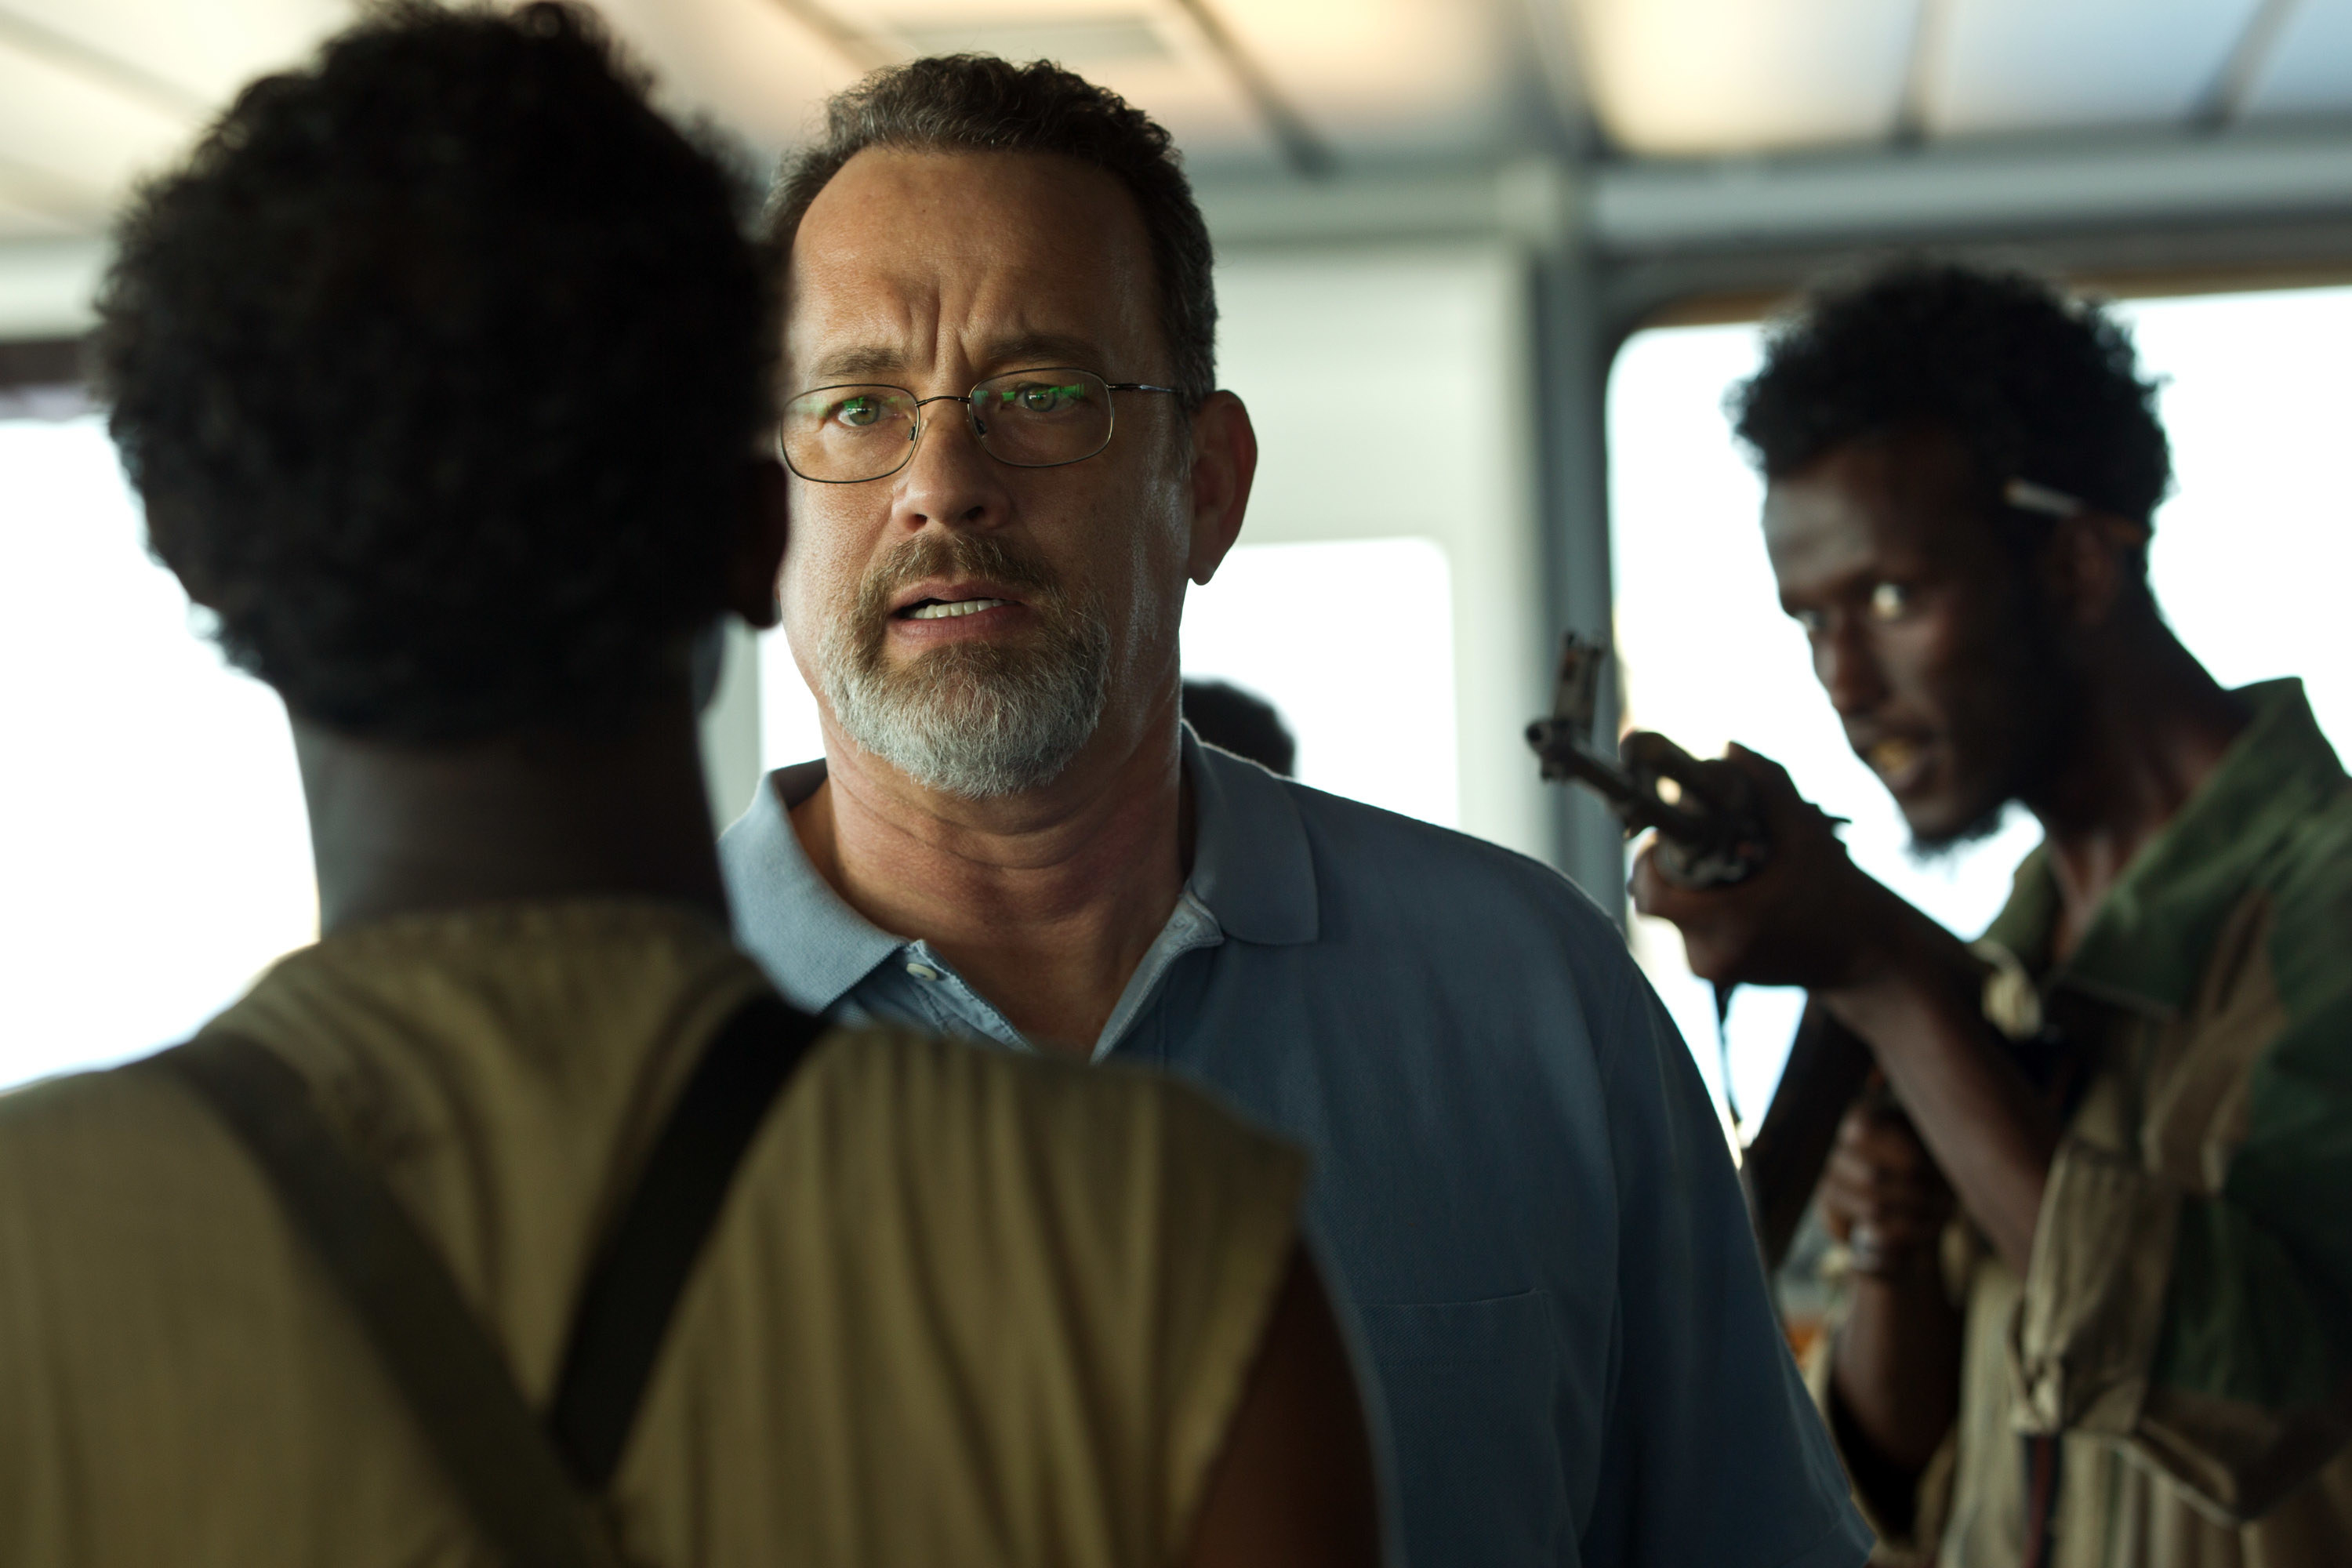 Captain Phillips negotiating with the pirates